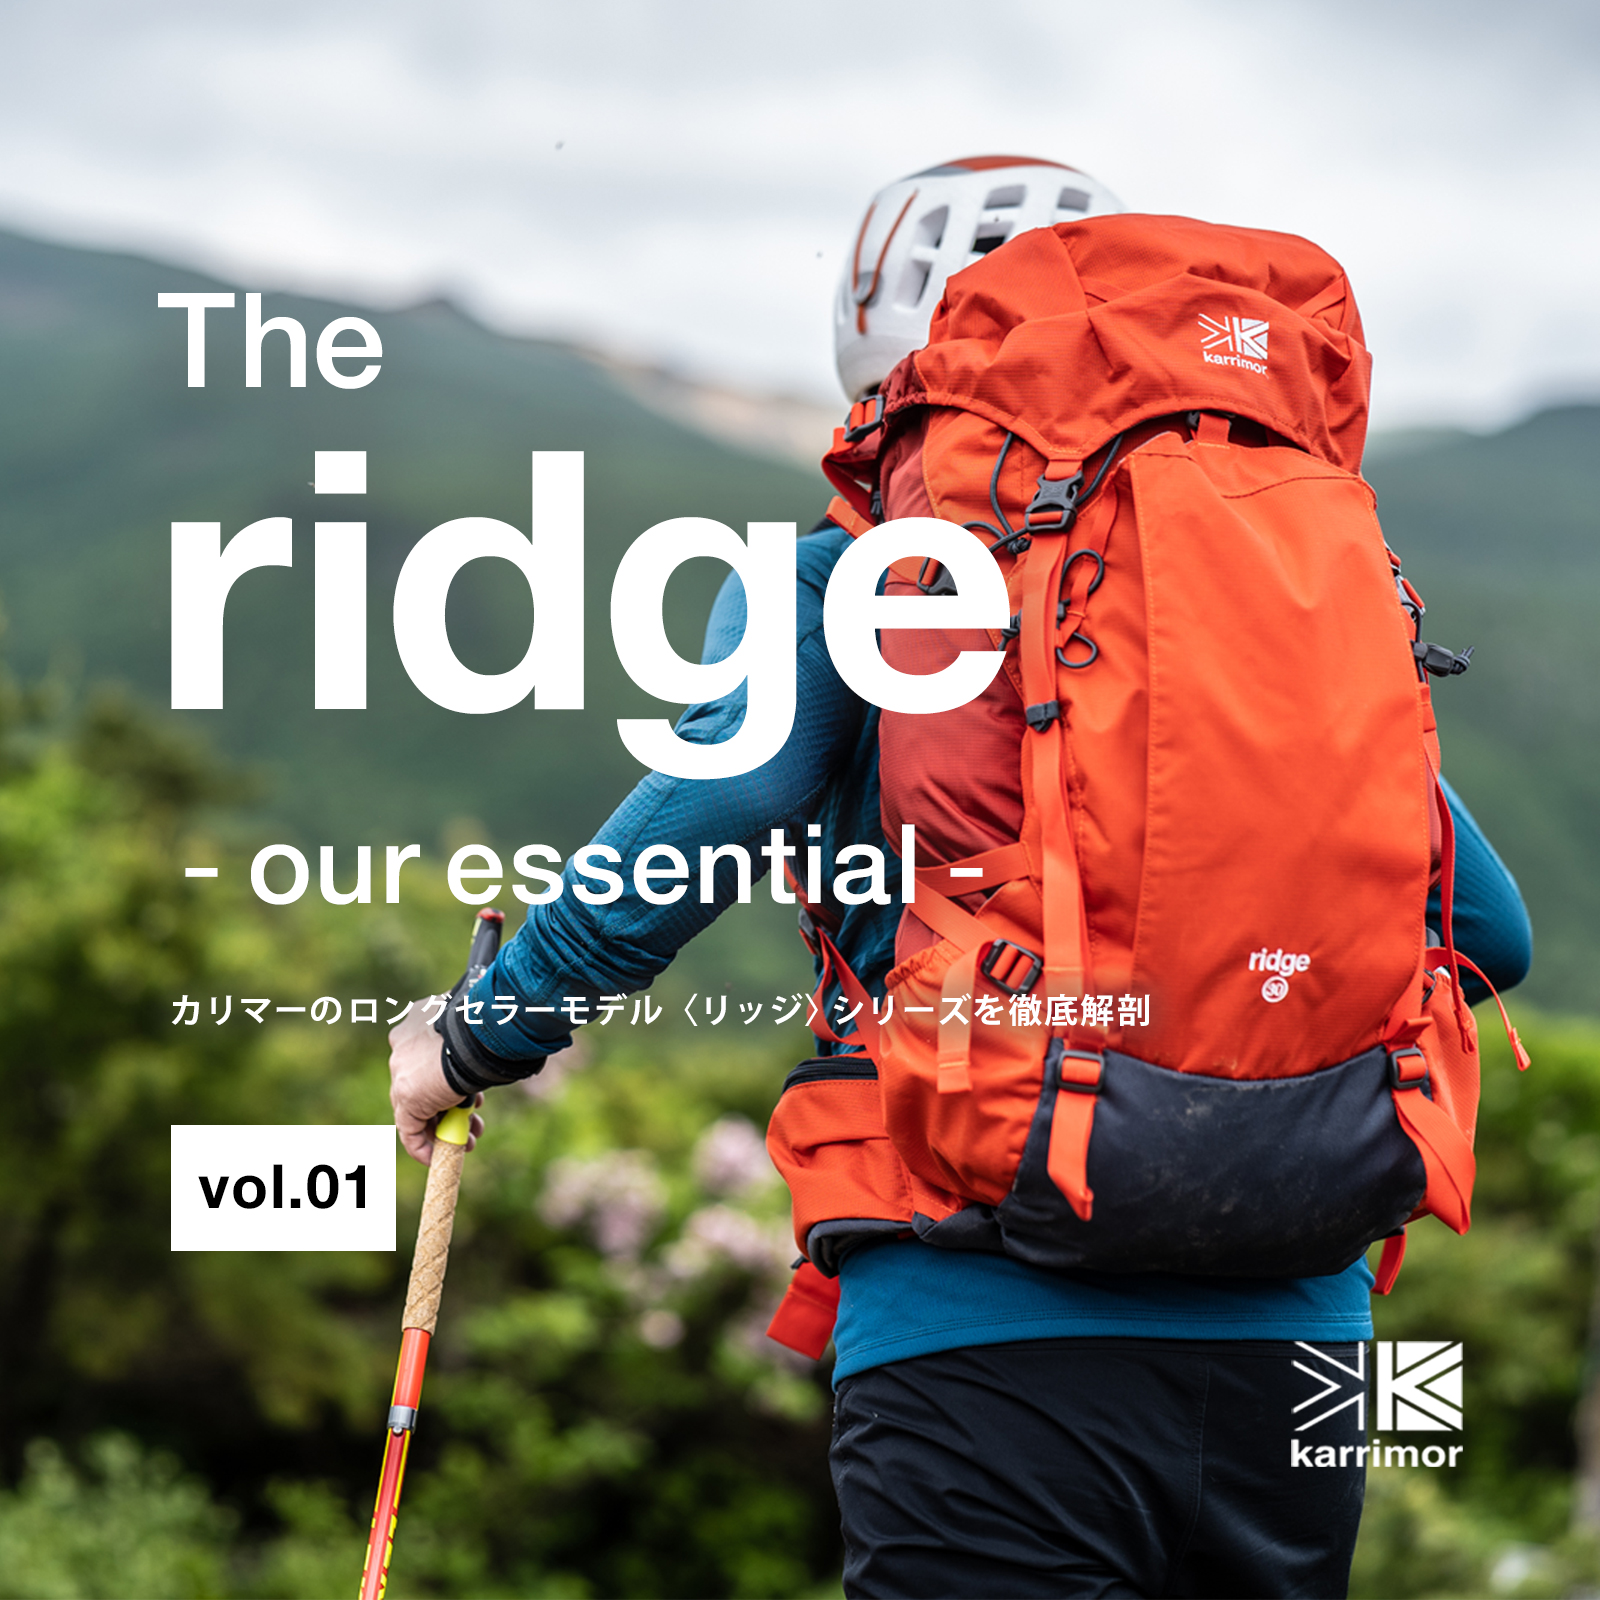 The ridge - our essential - | karrimor カリマー | リュックサック 